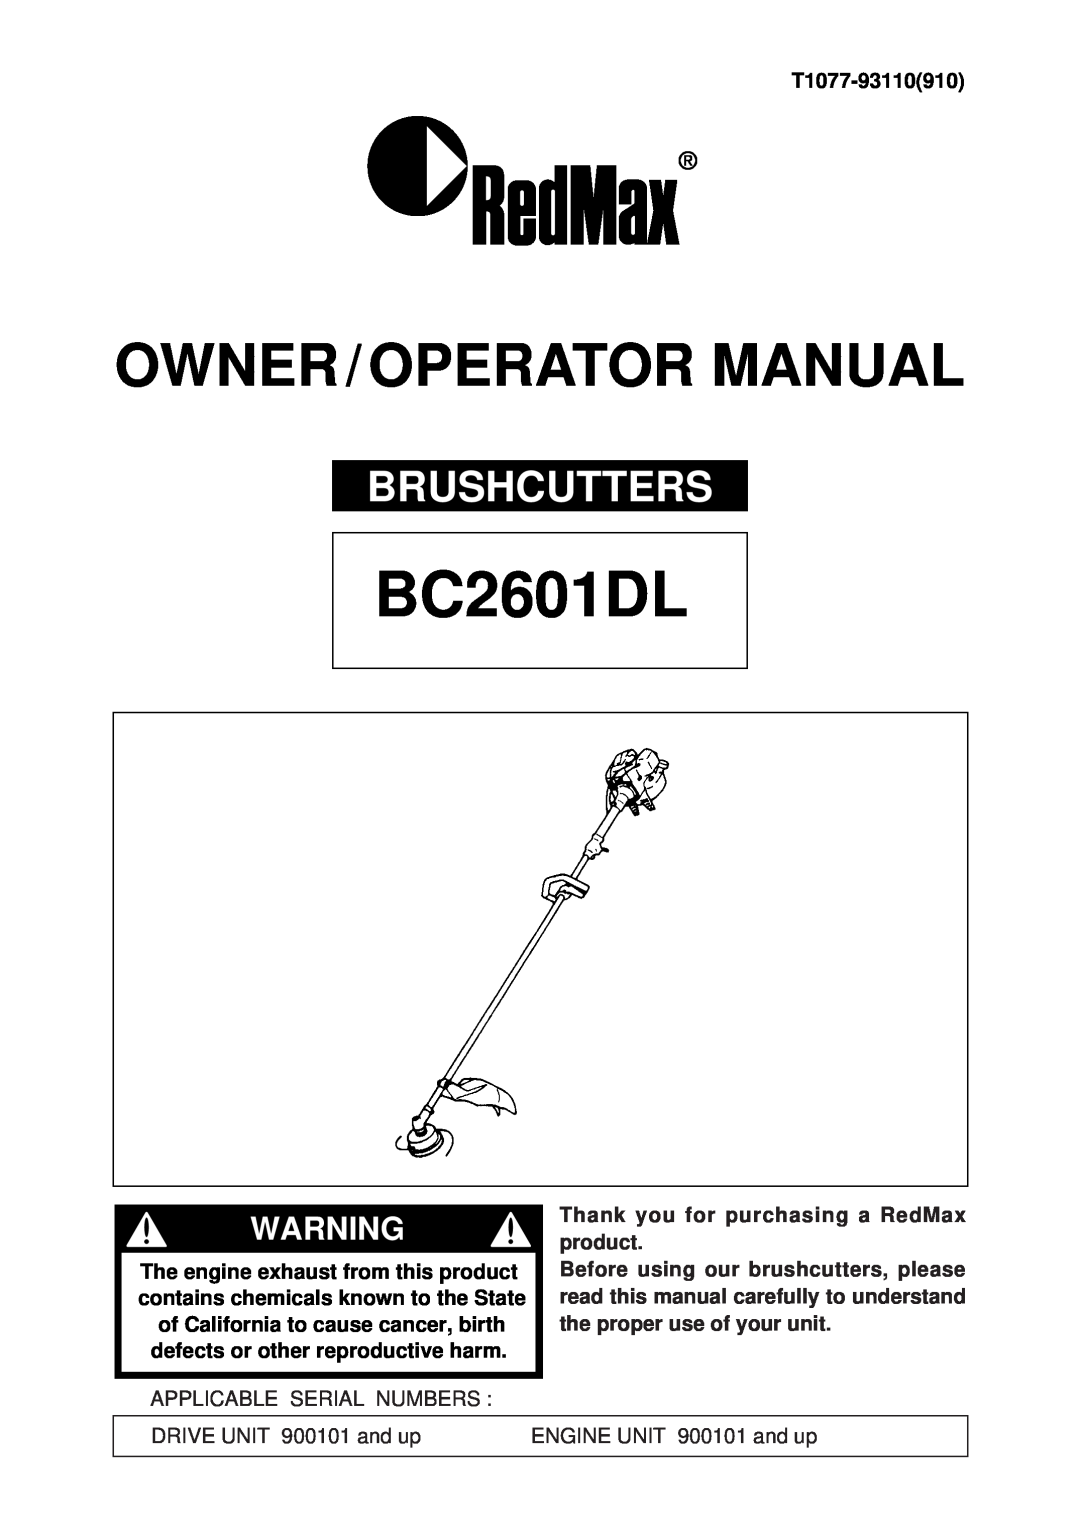 Zenoah BC2601DL manual Brushcutters, Owner / Operator Manual, T1077-93110910, Thank you for purchasing a RedMax product 